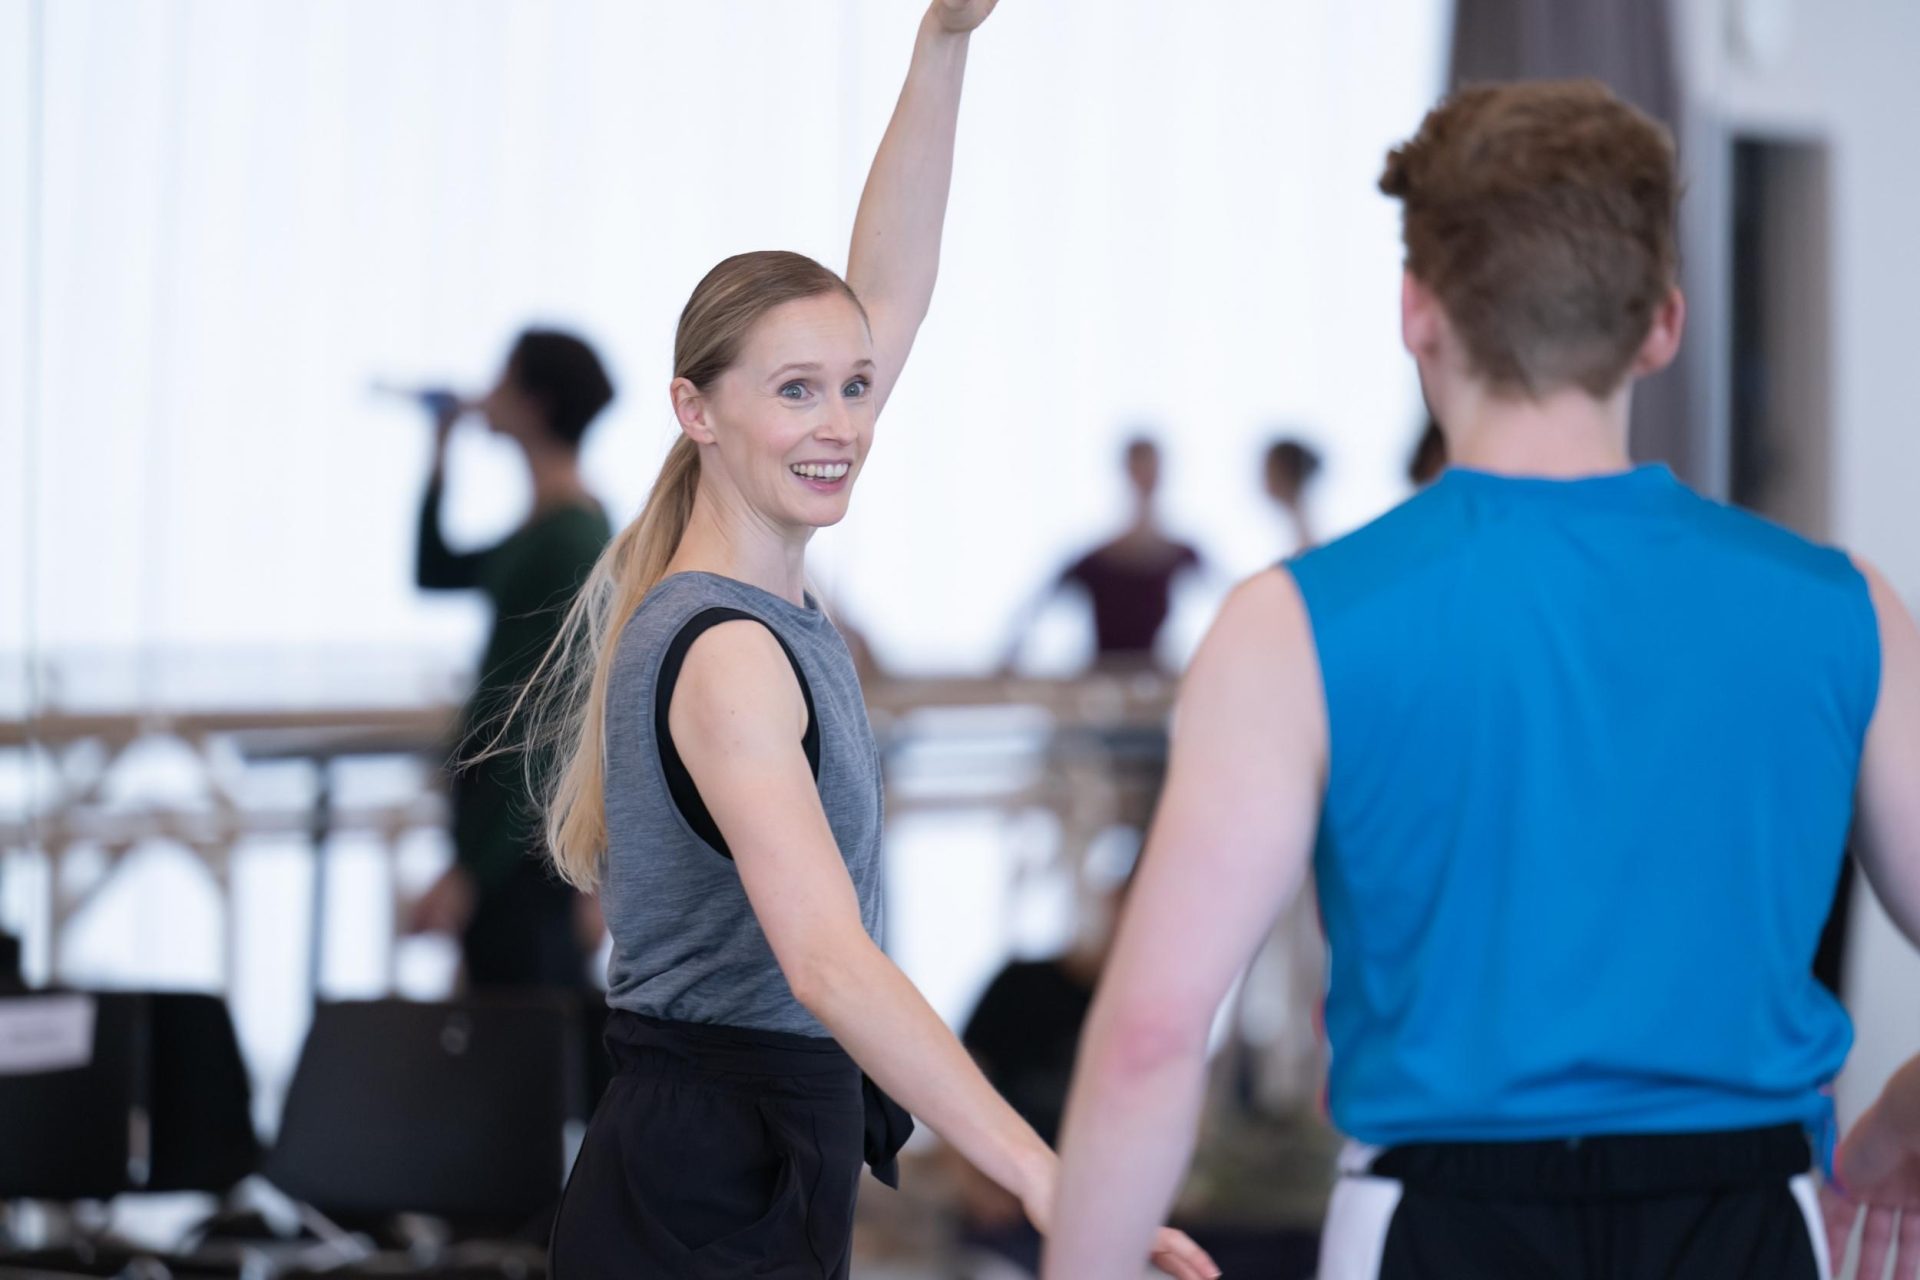 Take Five Blues: In Rehearsal | English National Ballet